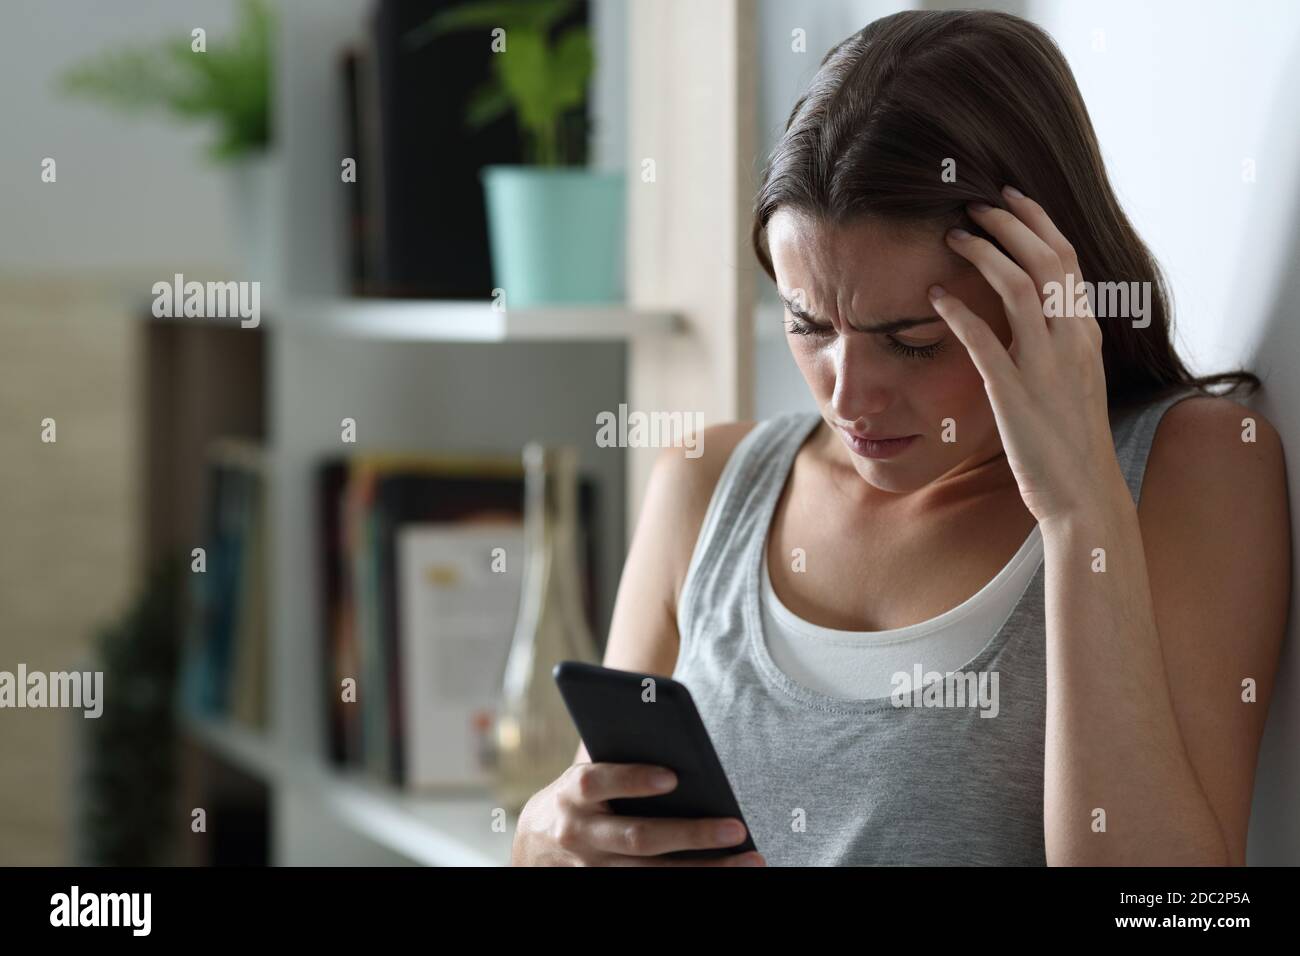 Sad teenage girl feeling lonely, looking at smartphone reading message  Stock Photo - Alamy